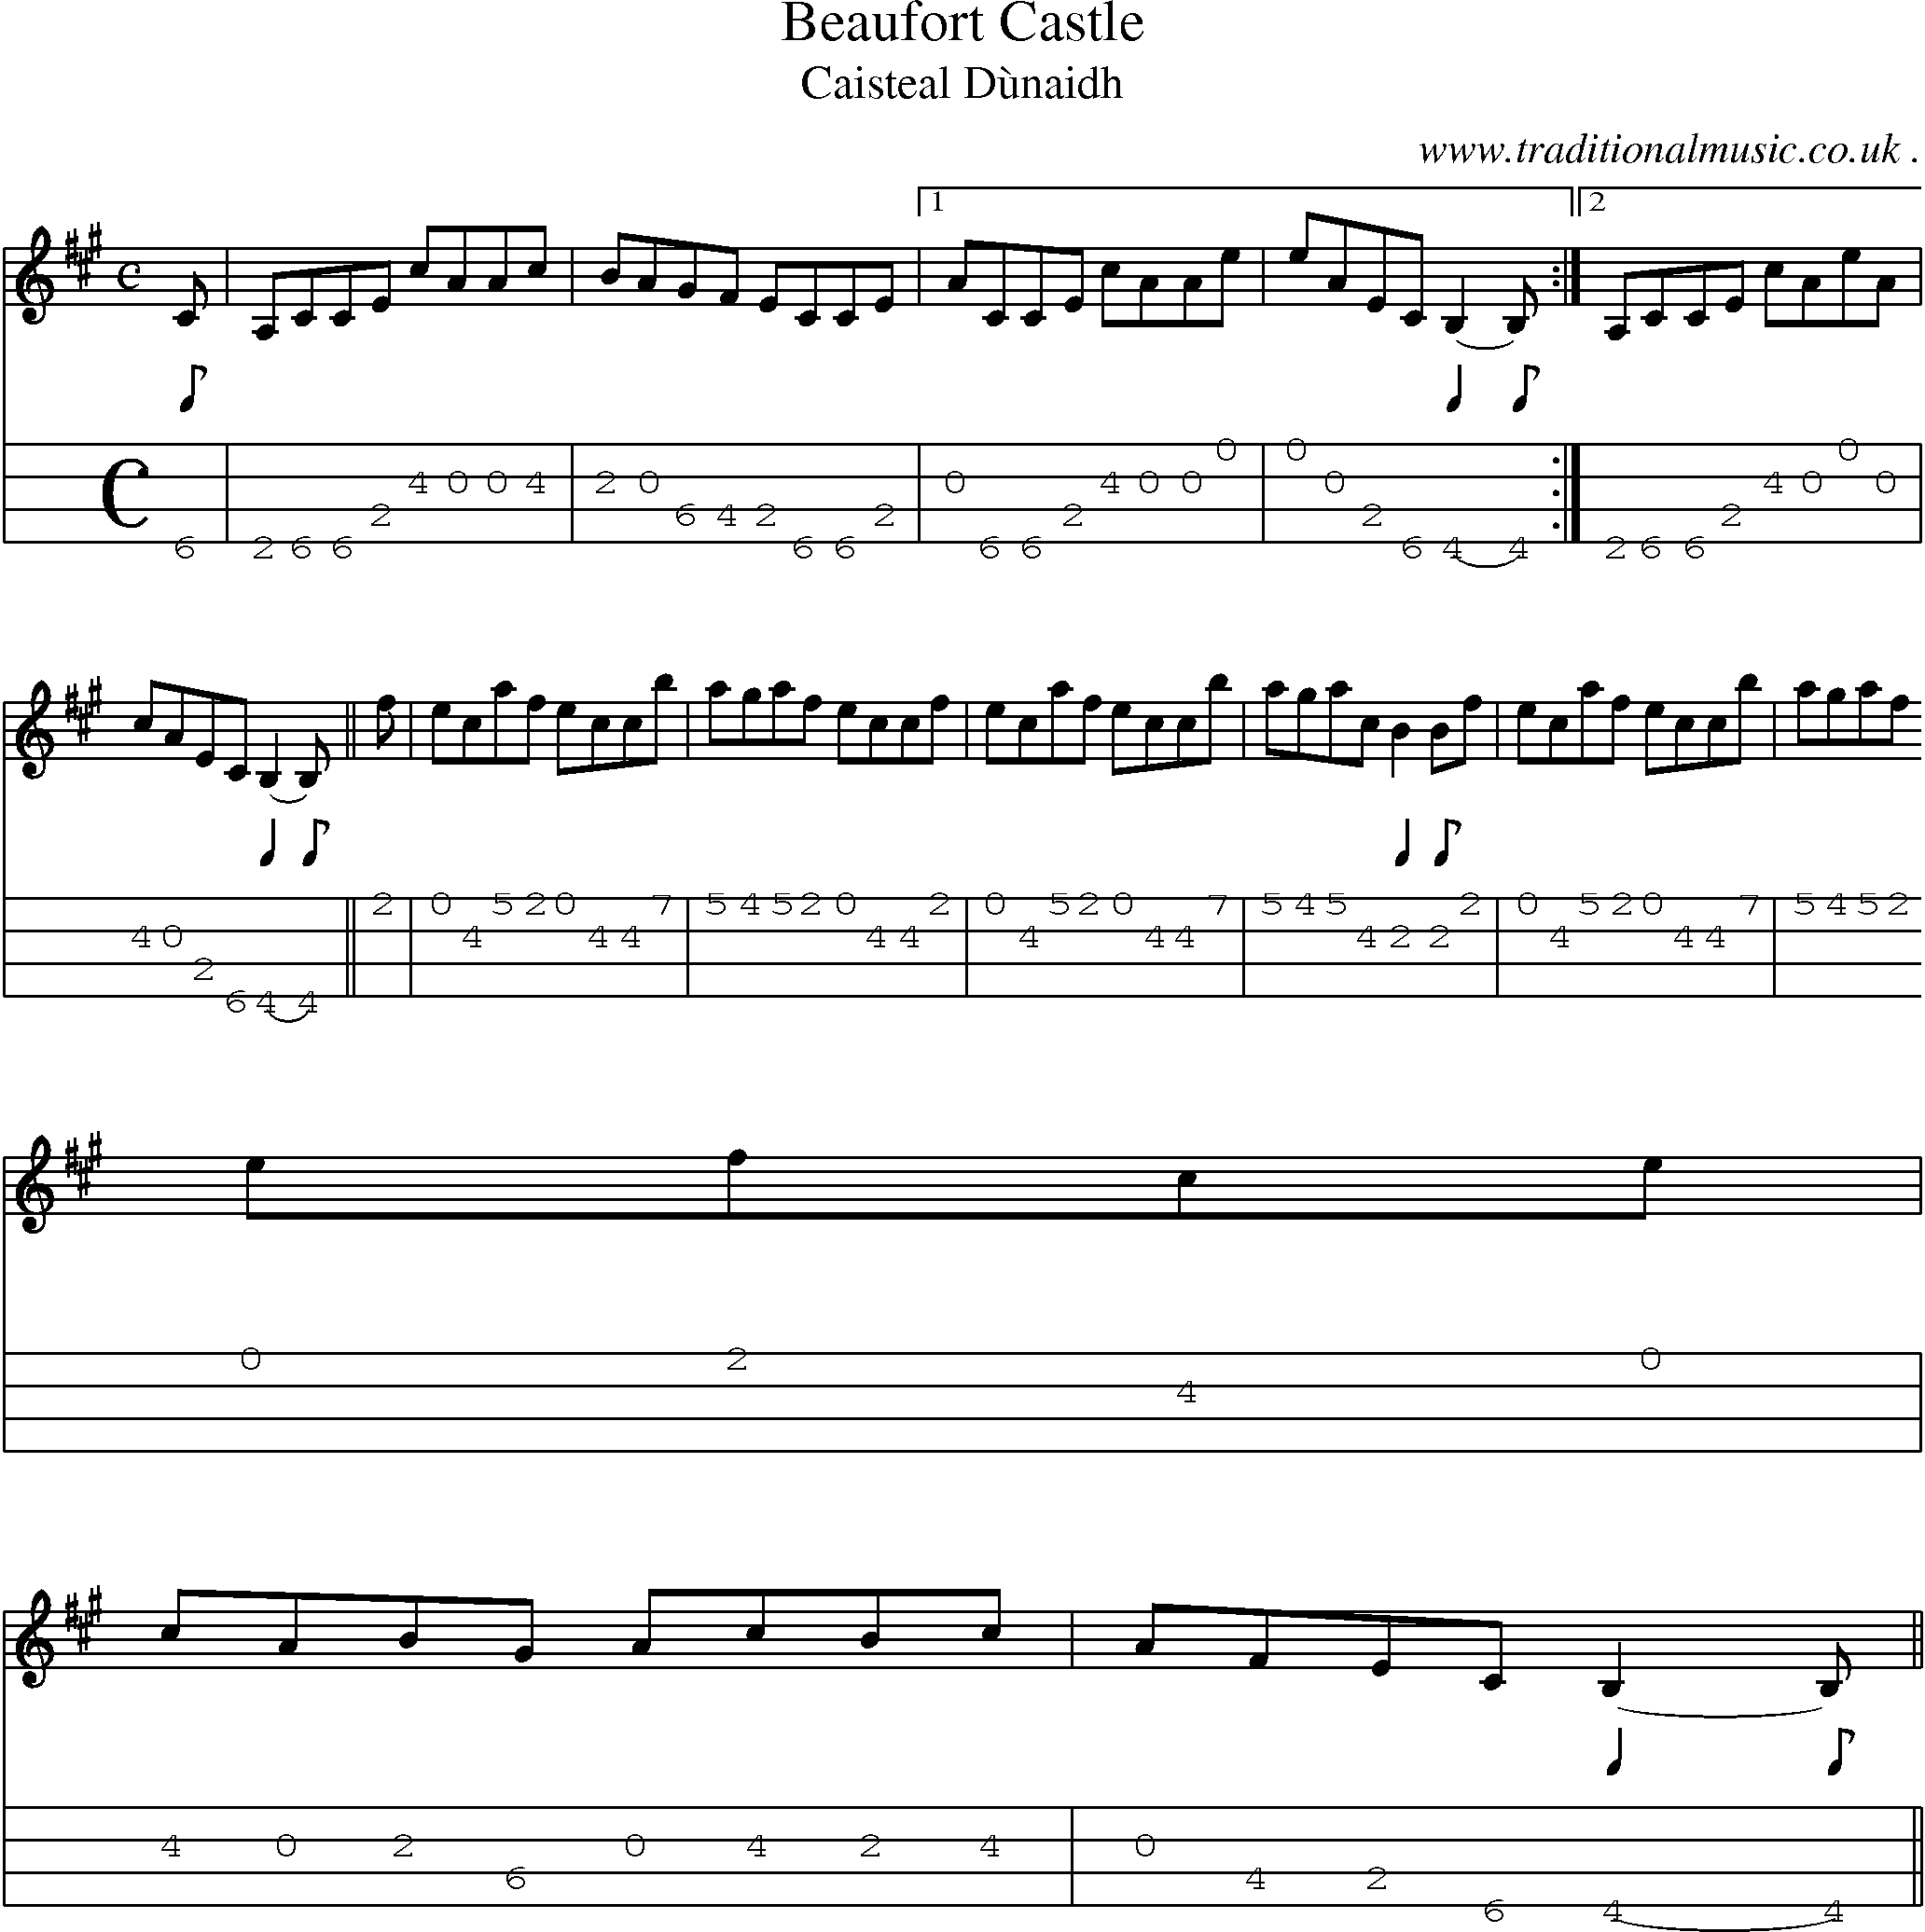 Sheet-music  score, Chords and Mandolin Tabs for Beaufort Castle